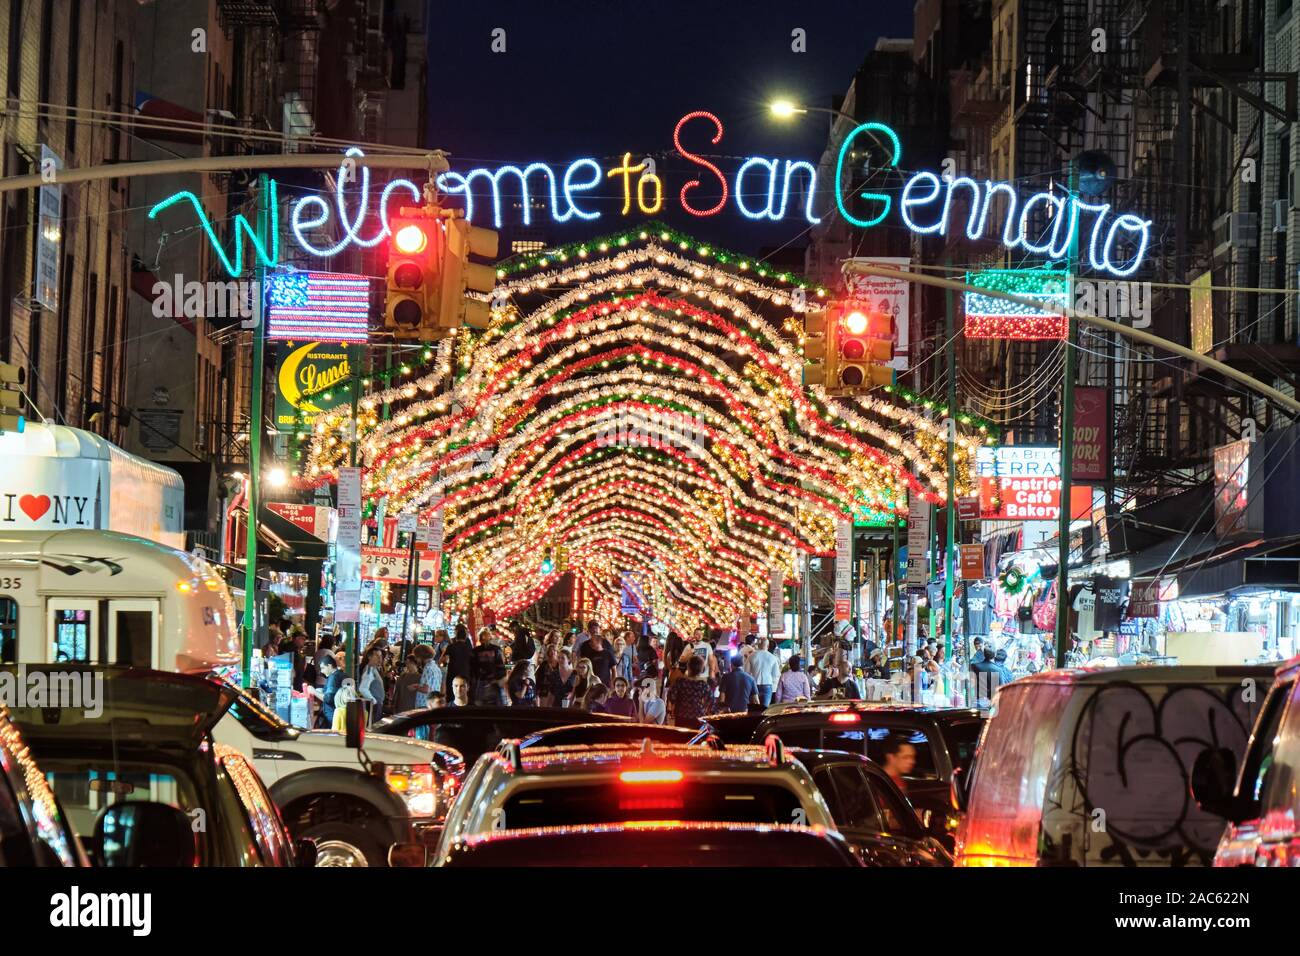 Feast of San Gennaro Festival in Little Italy - New York City Stock Photo